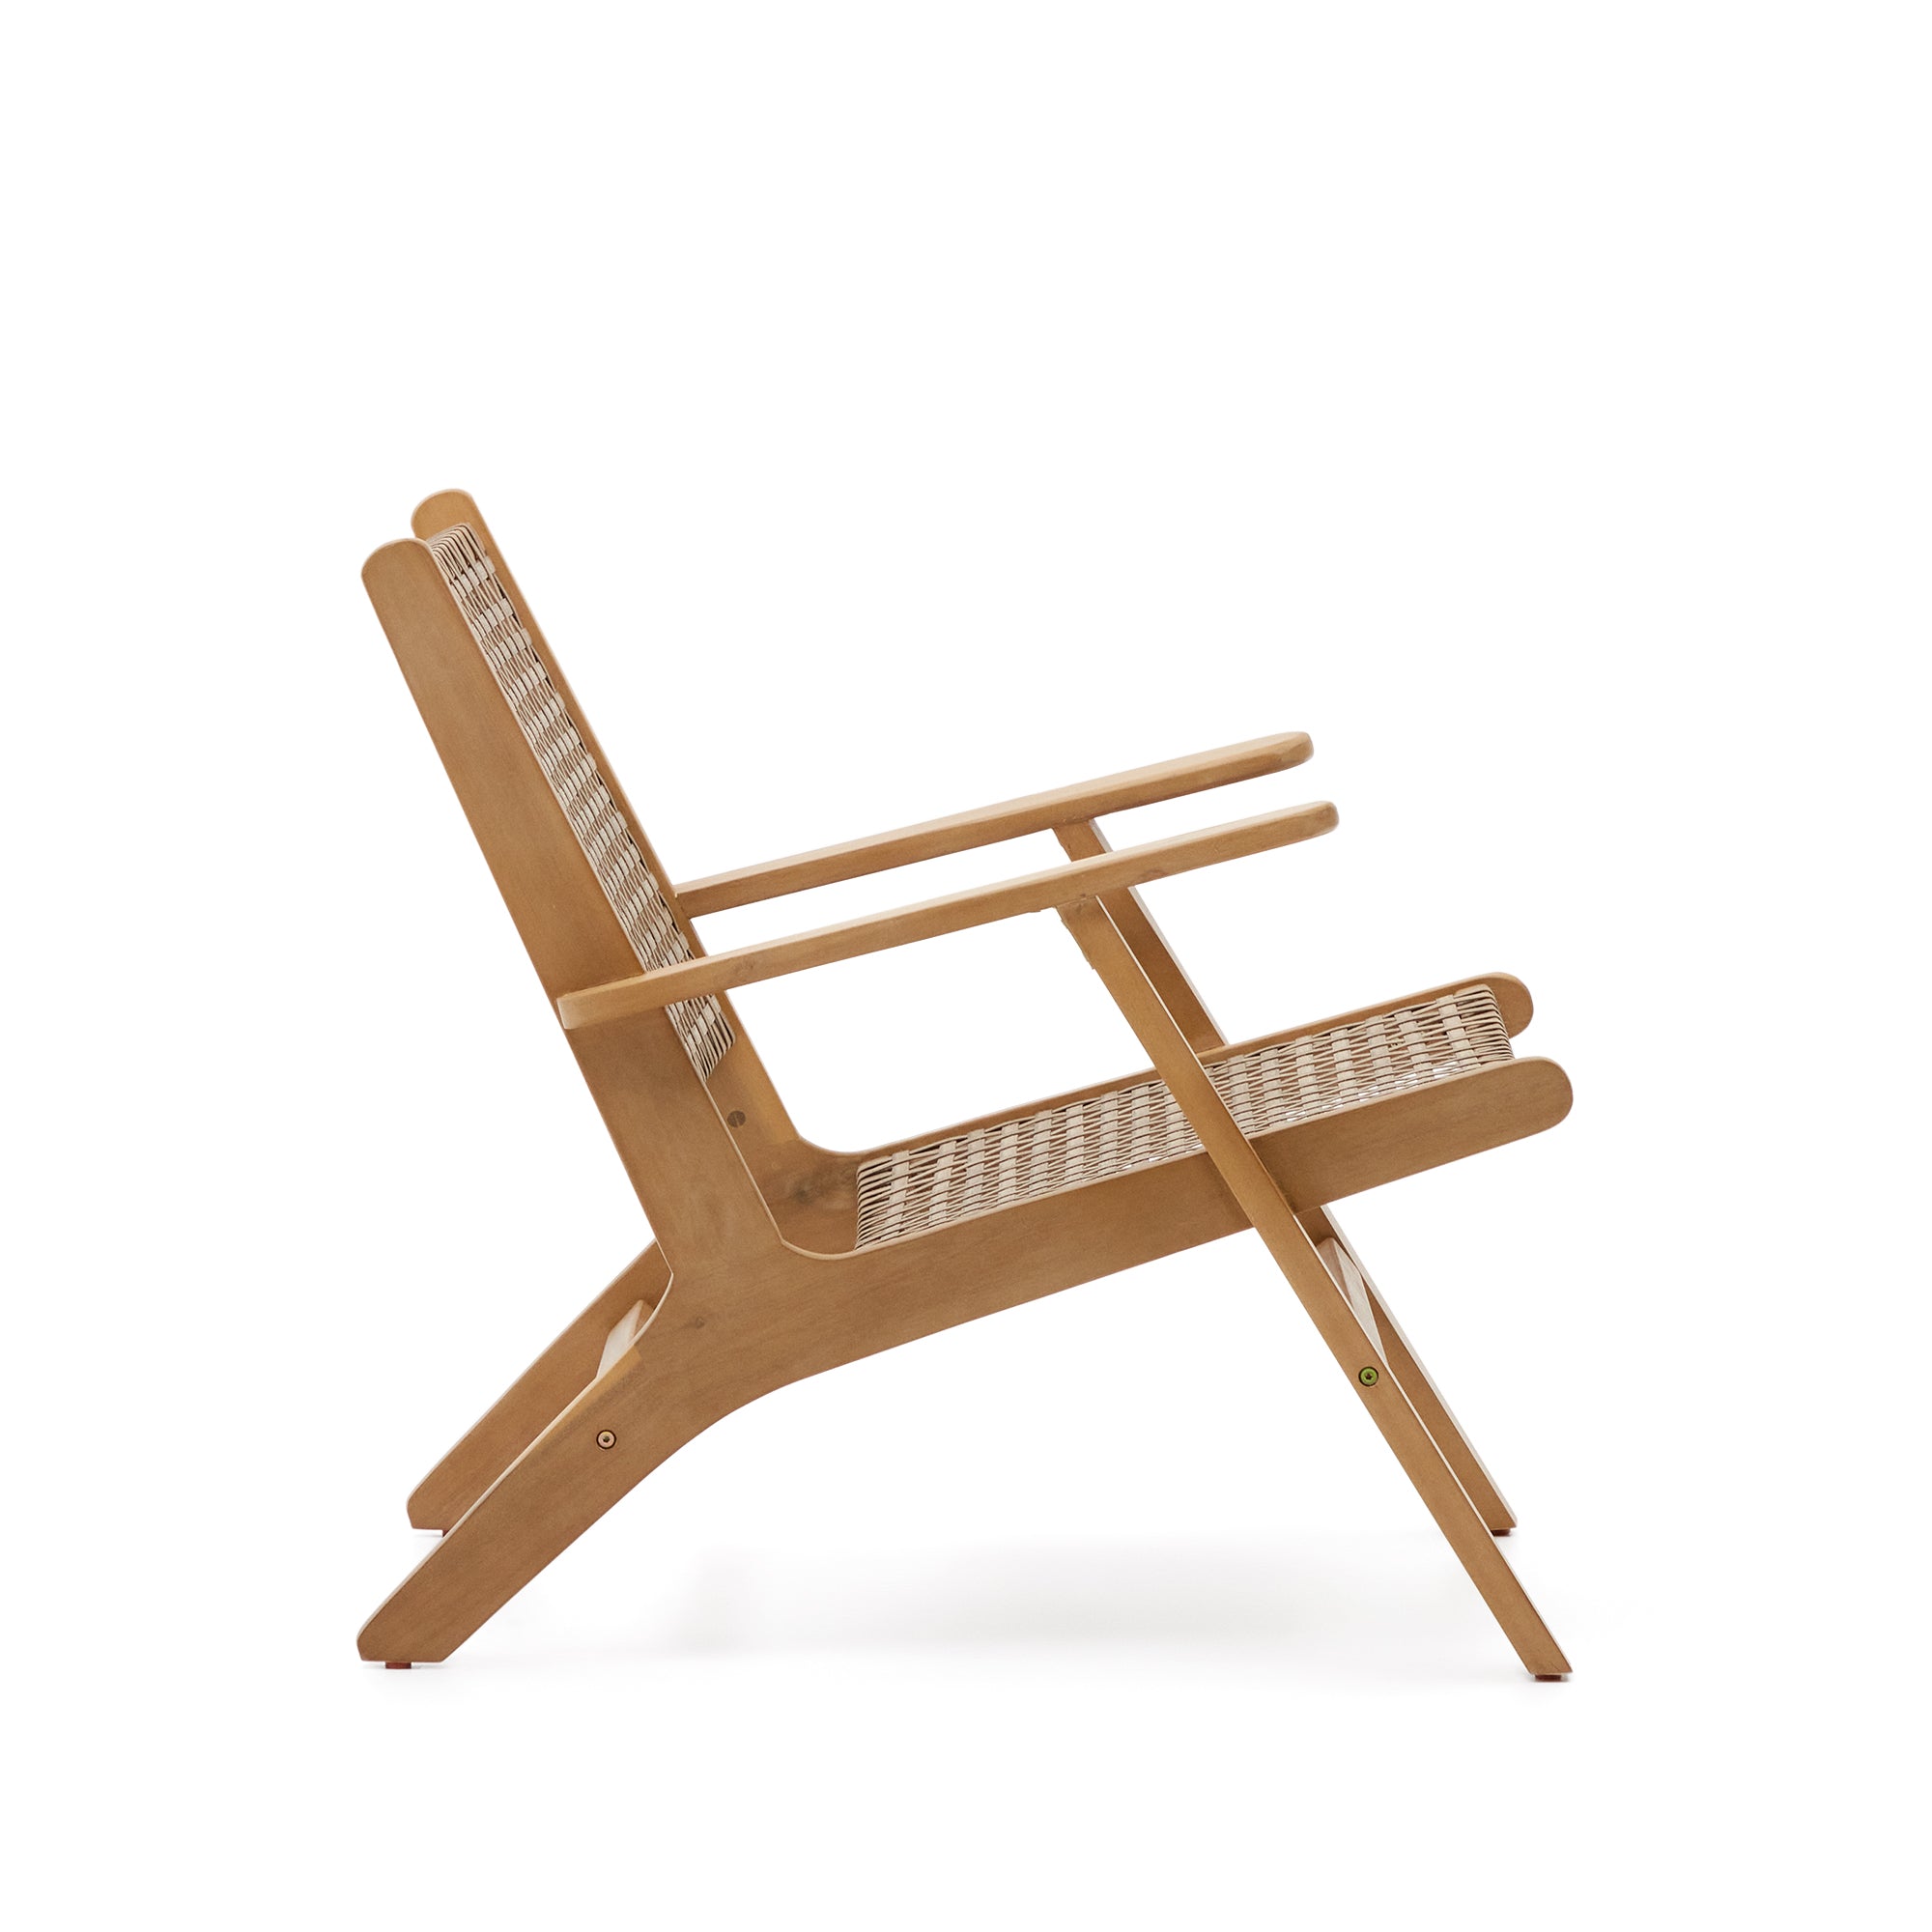 Grignoon chair, made from solid acacia wood and woven wicker FSC 100%